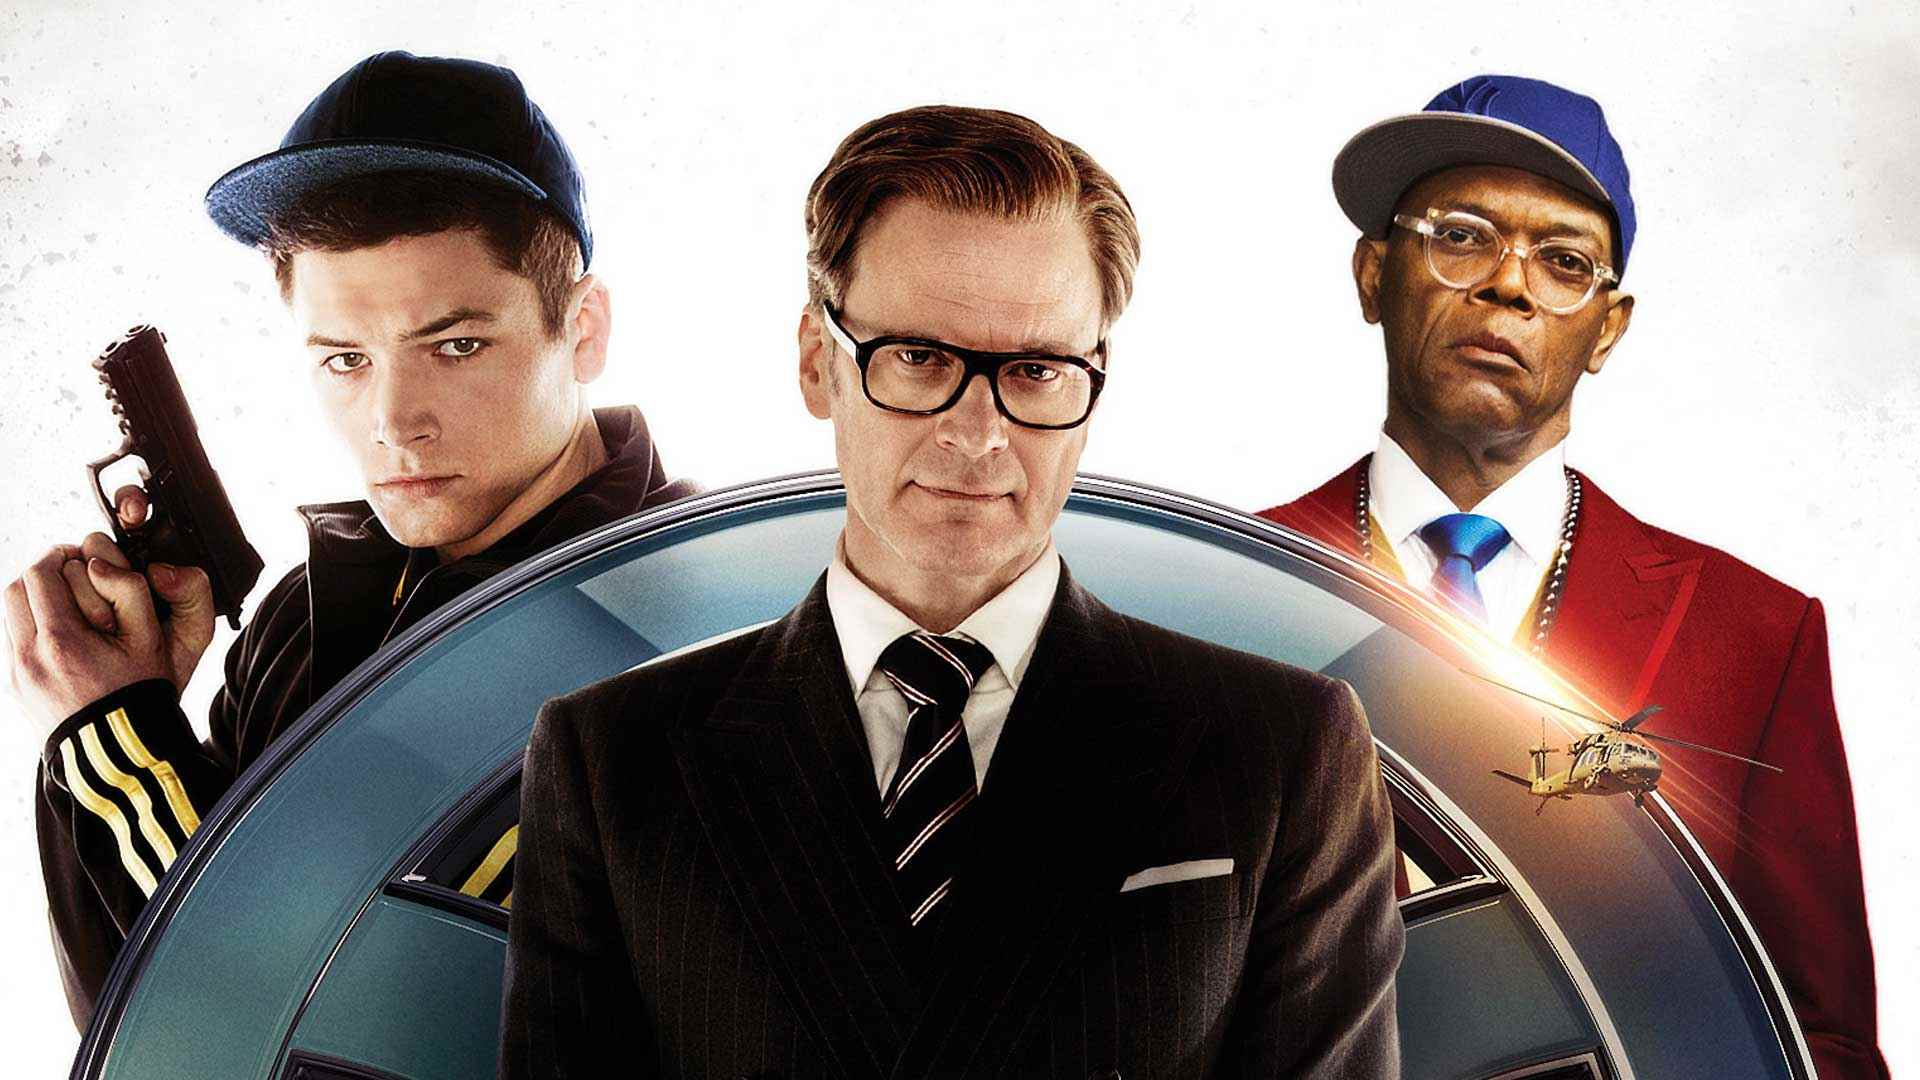 Kingsman merchandise, Exclusive discounts, Online shopping, Movie-themed products, 1920x1080 Full HD Desktop